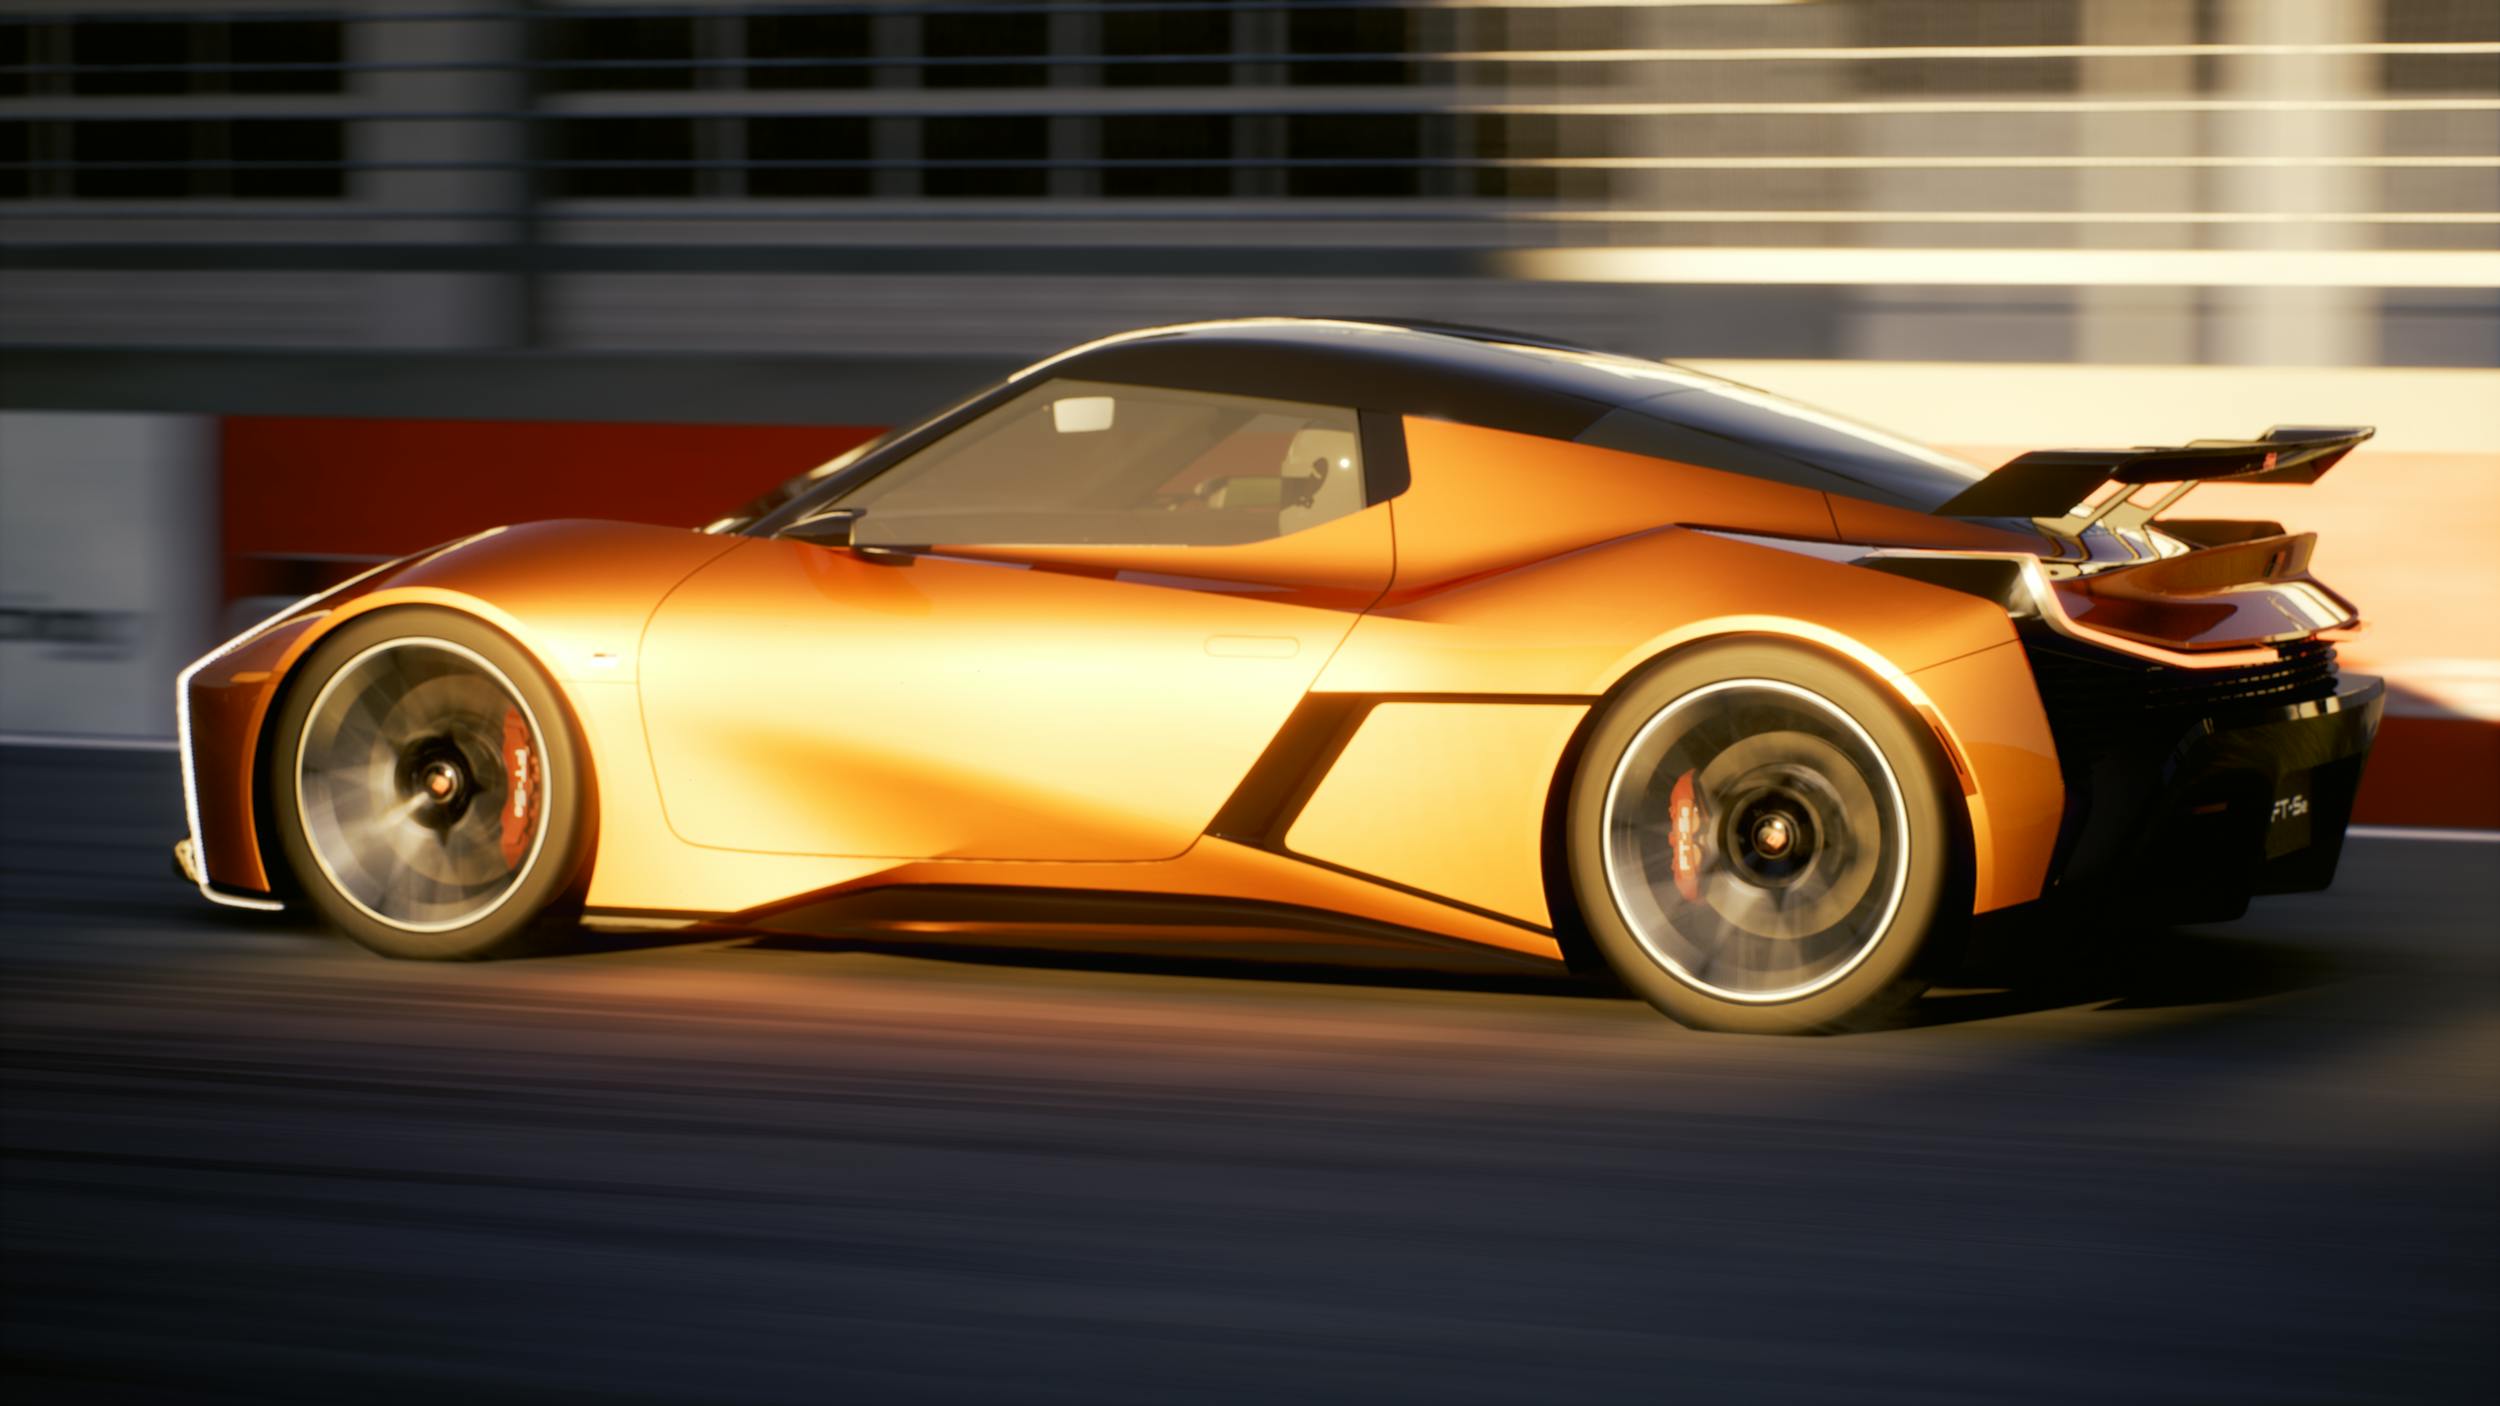 Toyota FT-Se sports car concept exterior side profile rendering